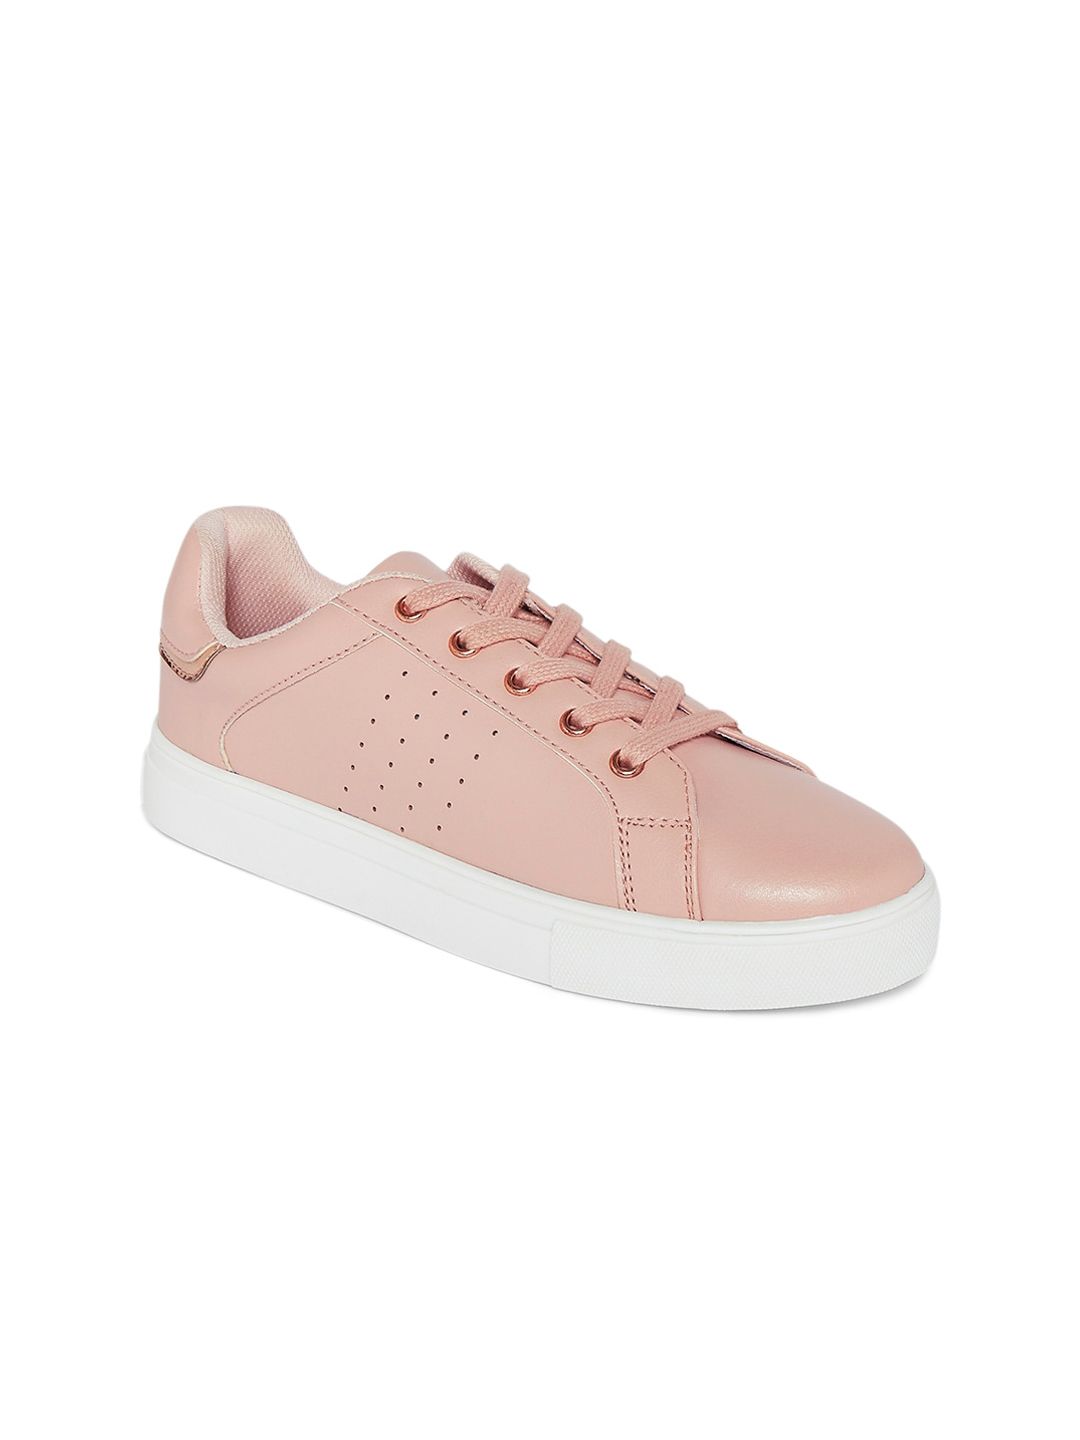 Forever Glam by Pantaloons Women Pink Sneakers Price in India